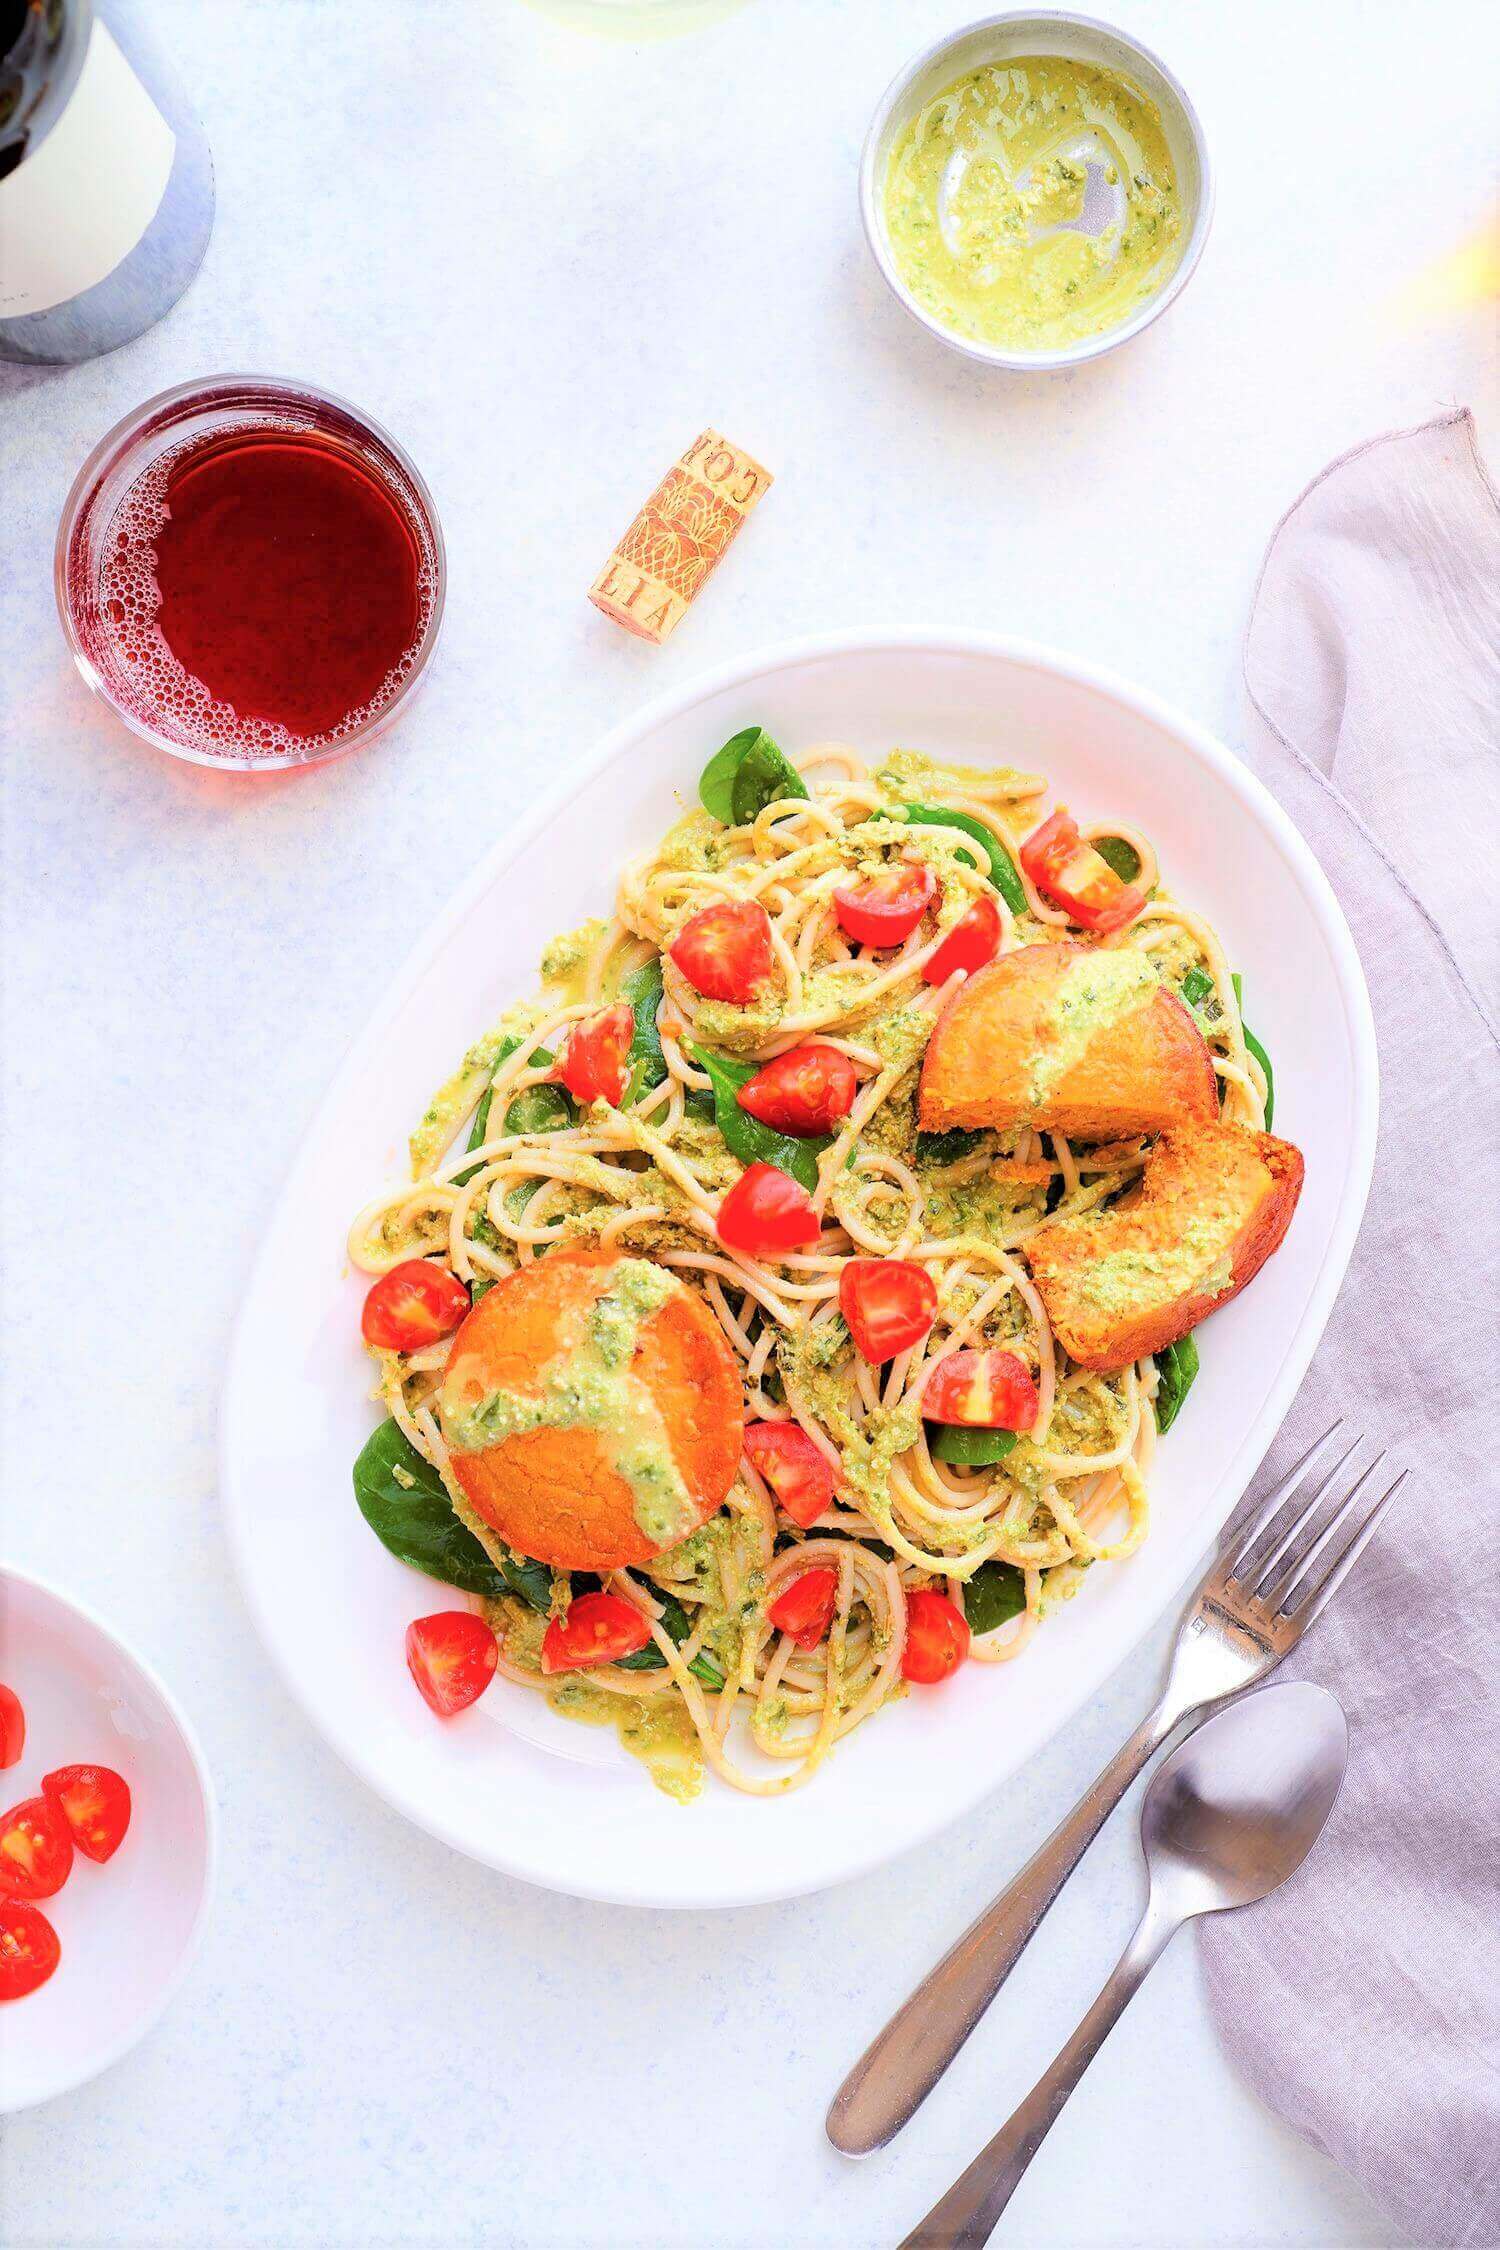 Pesto Pasta with Sun-dried Tomato Cakes and Spinach